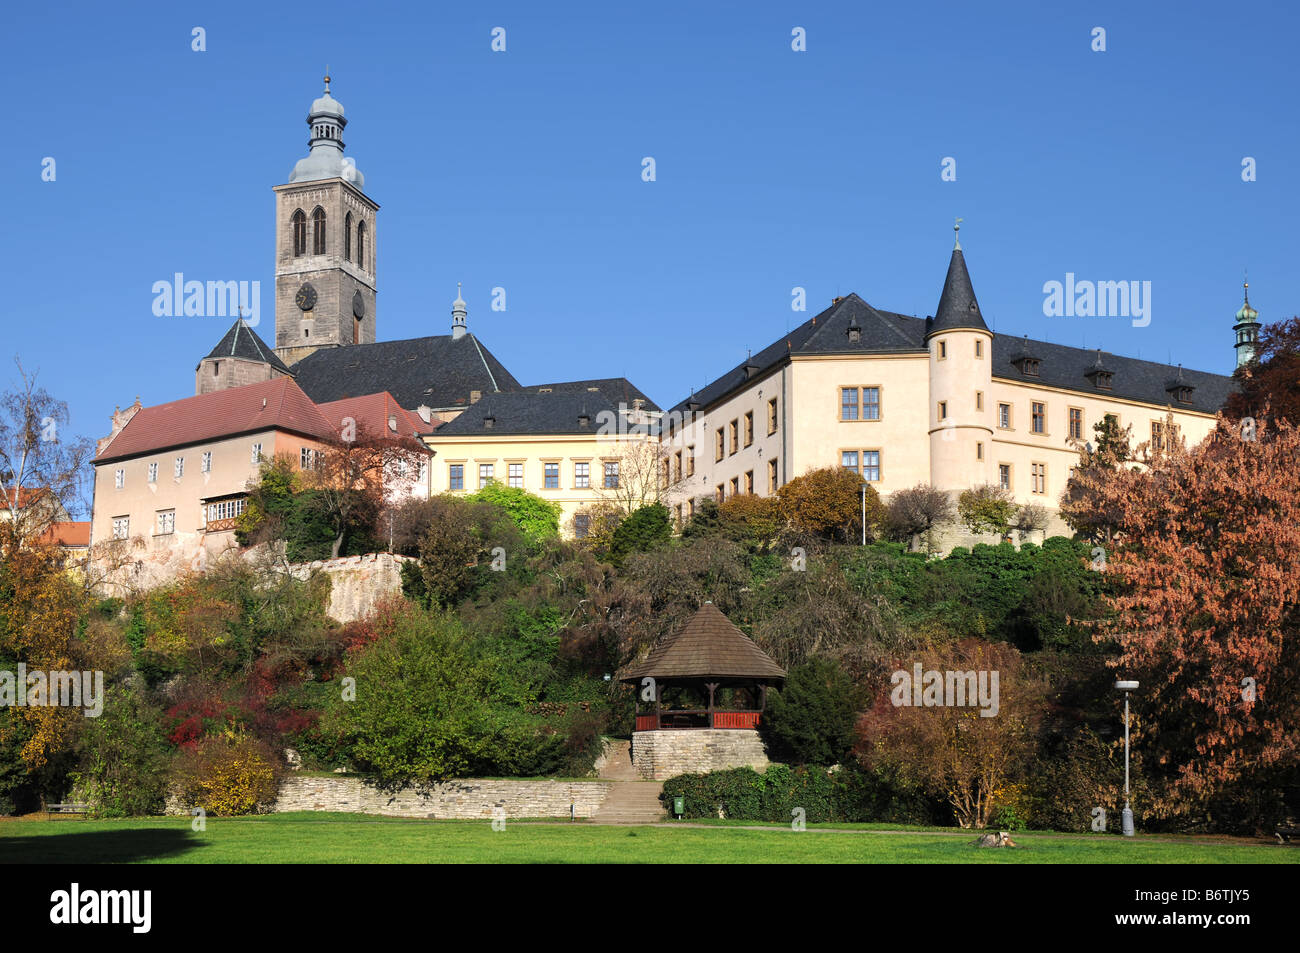 St. James Church and the Italian Court in the historical center of Kutná Hora, Czech Republic. Stock Photo